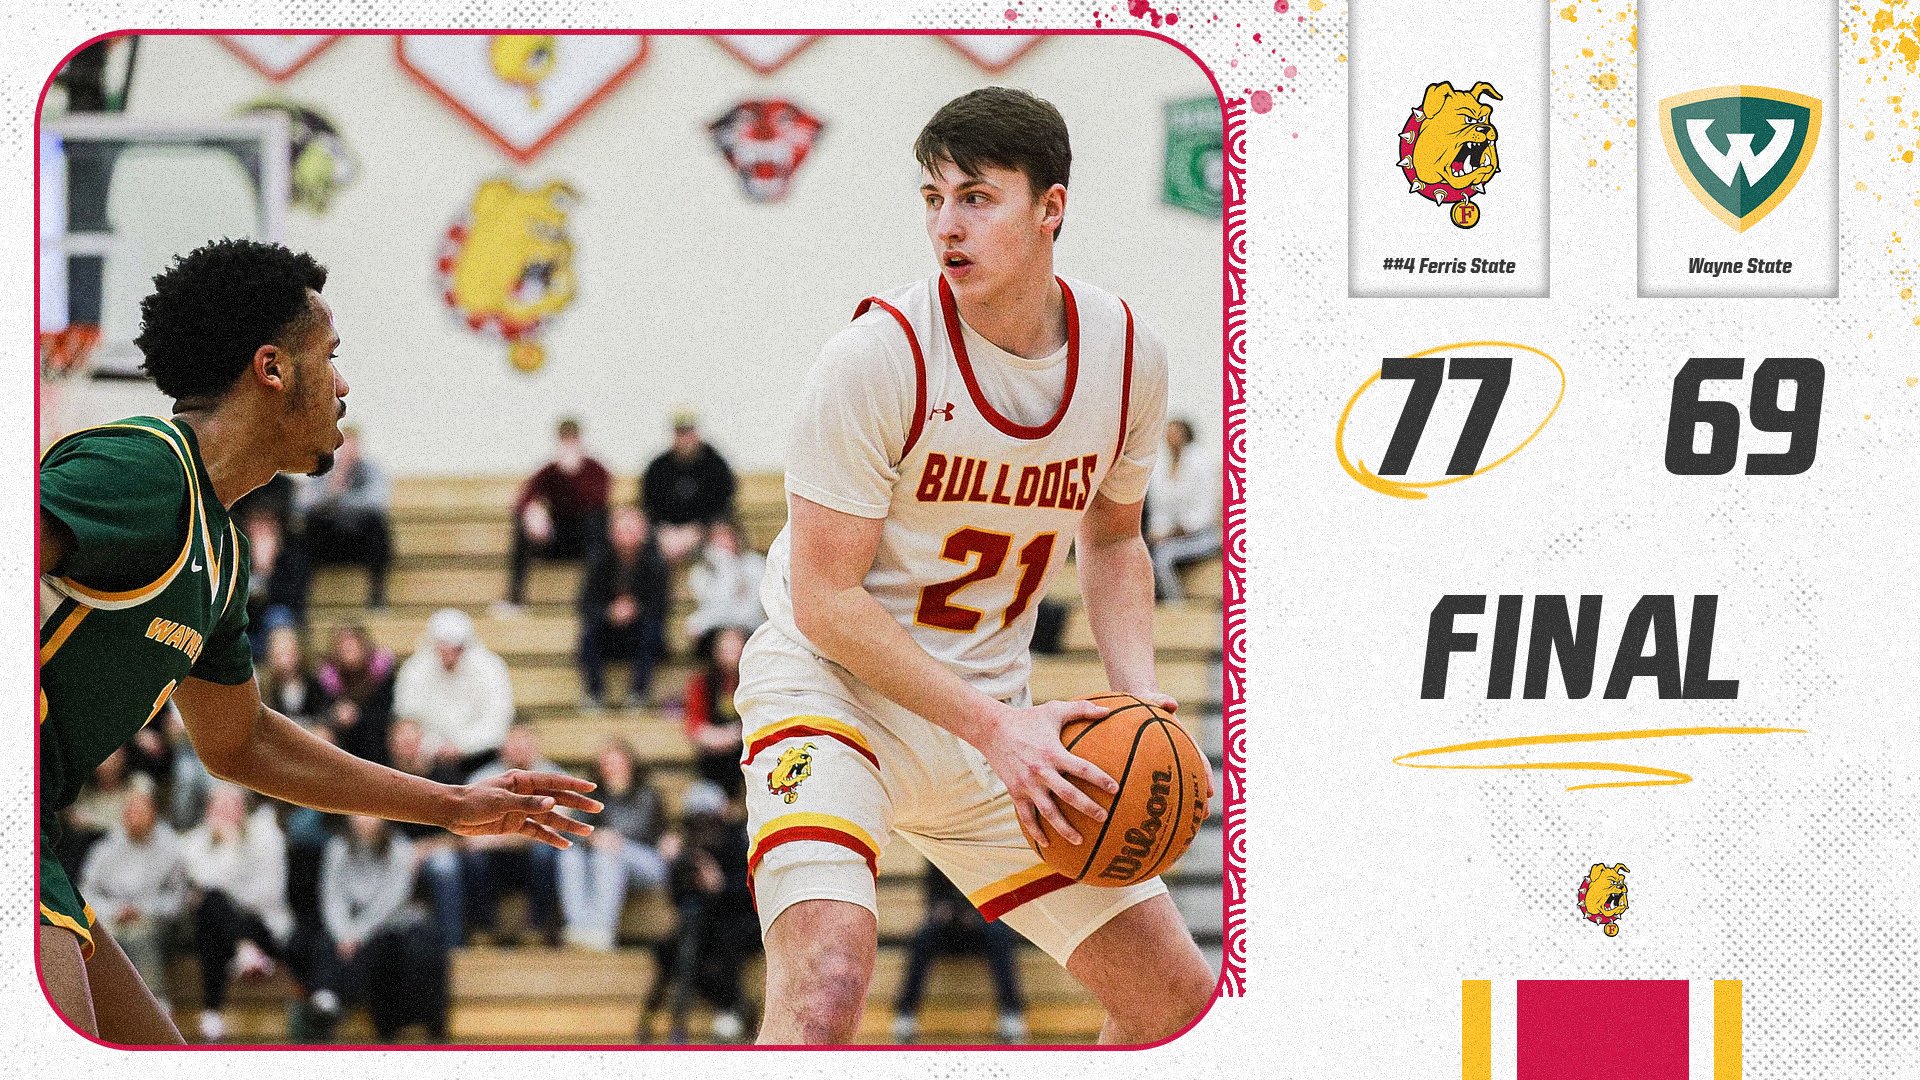 Ferris State Tops Wayne State In GLIAC Battle To Complete Home Sweep